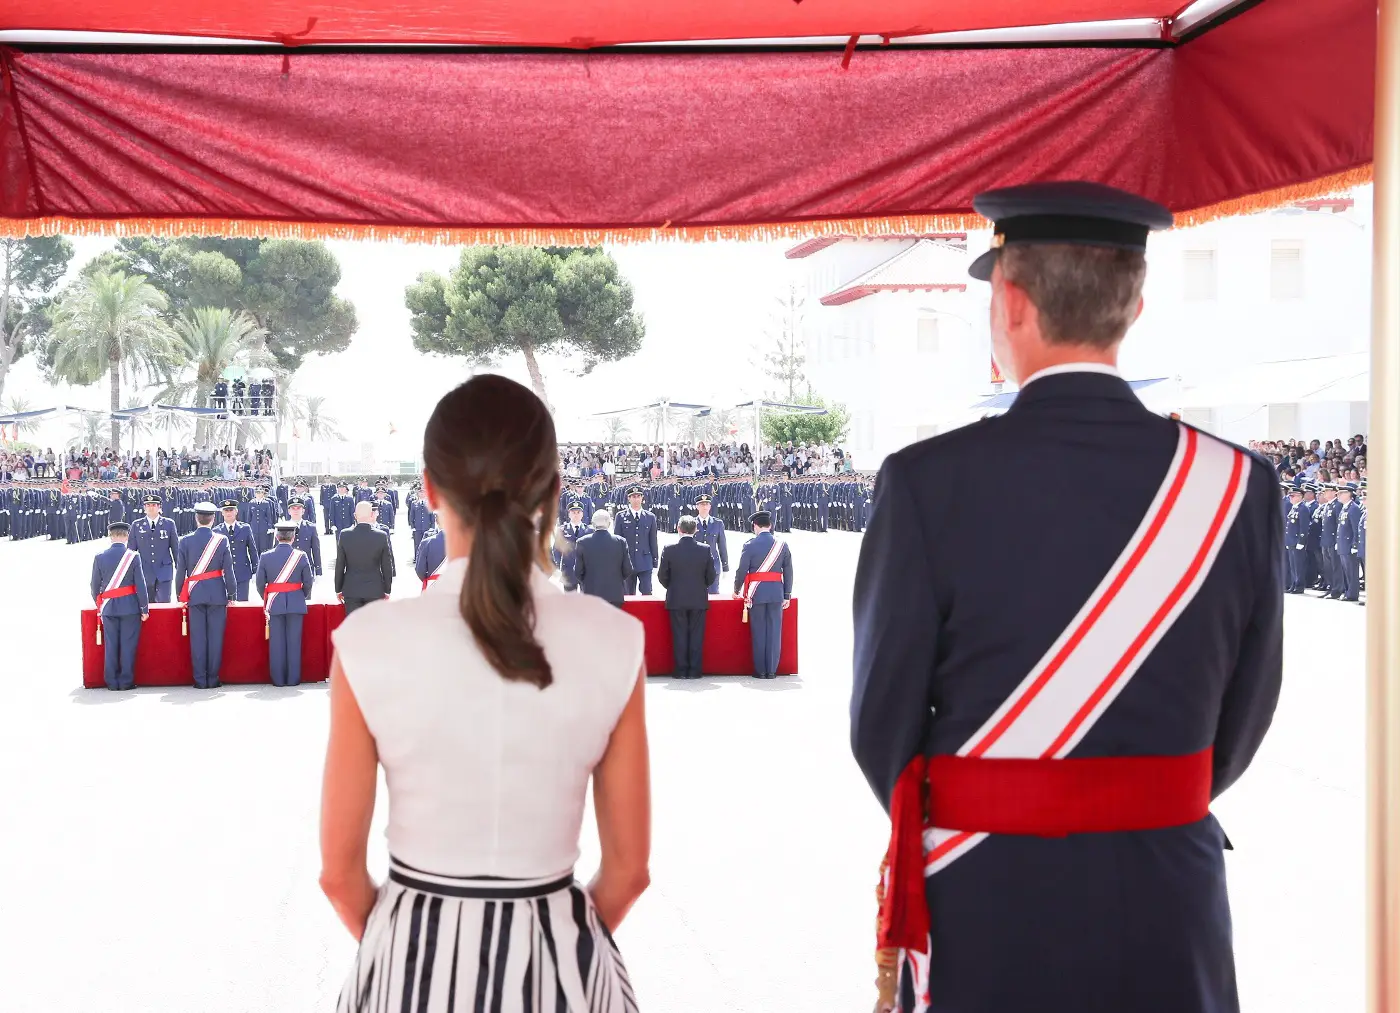 Queen Letizia in Zara top and Navy stripped skirt at the Military Pass out Parade